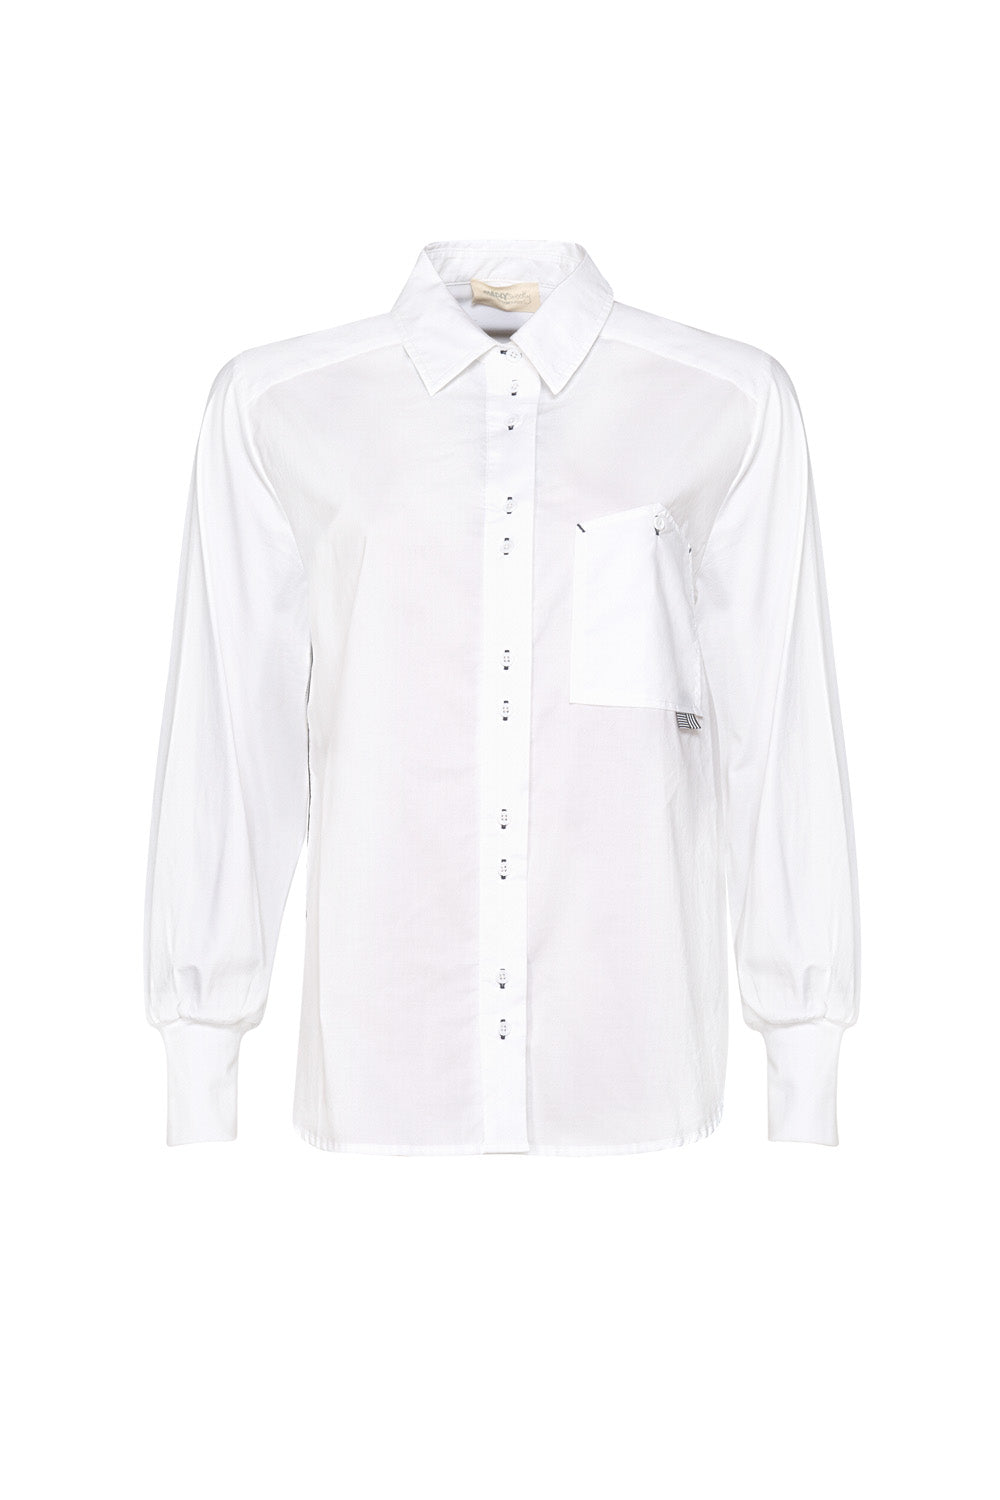 MADLY SWEETLY MIXED MEDIA SHIRT - WHITE - THE VOGUE STORE